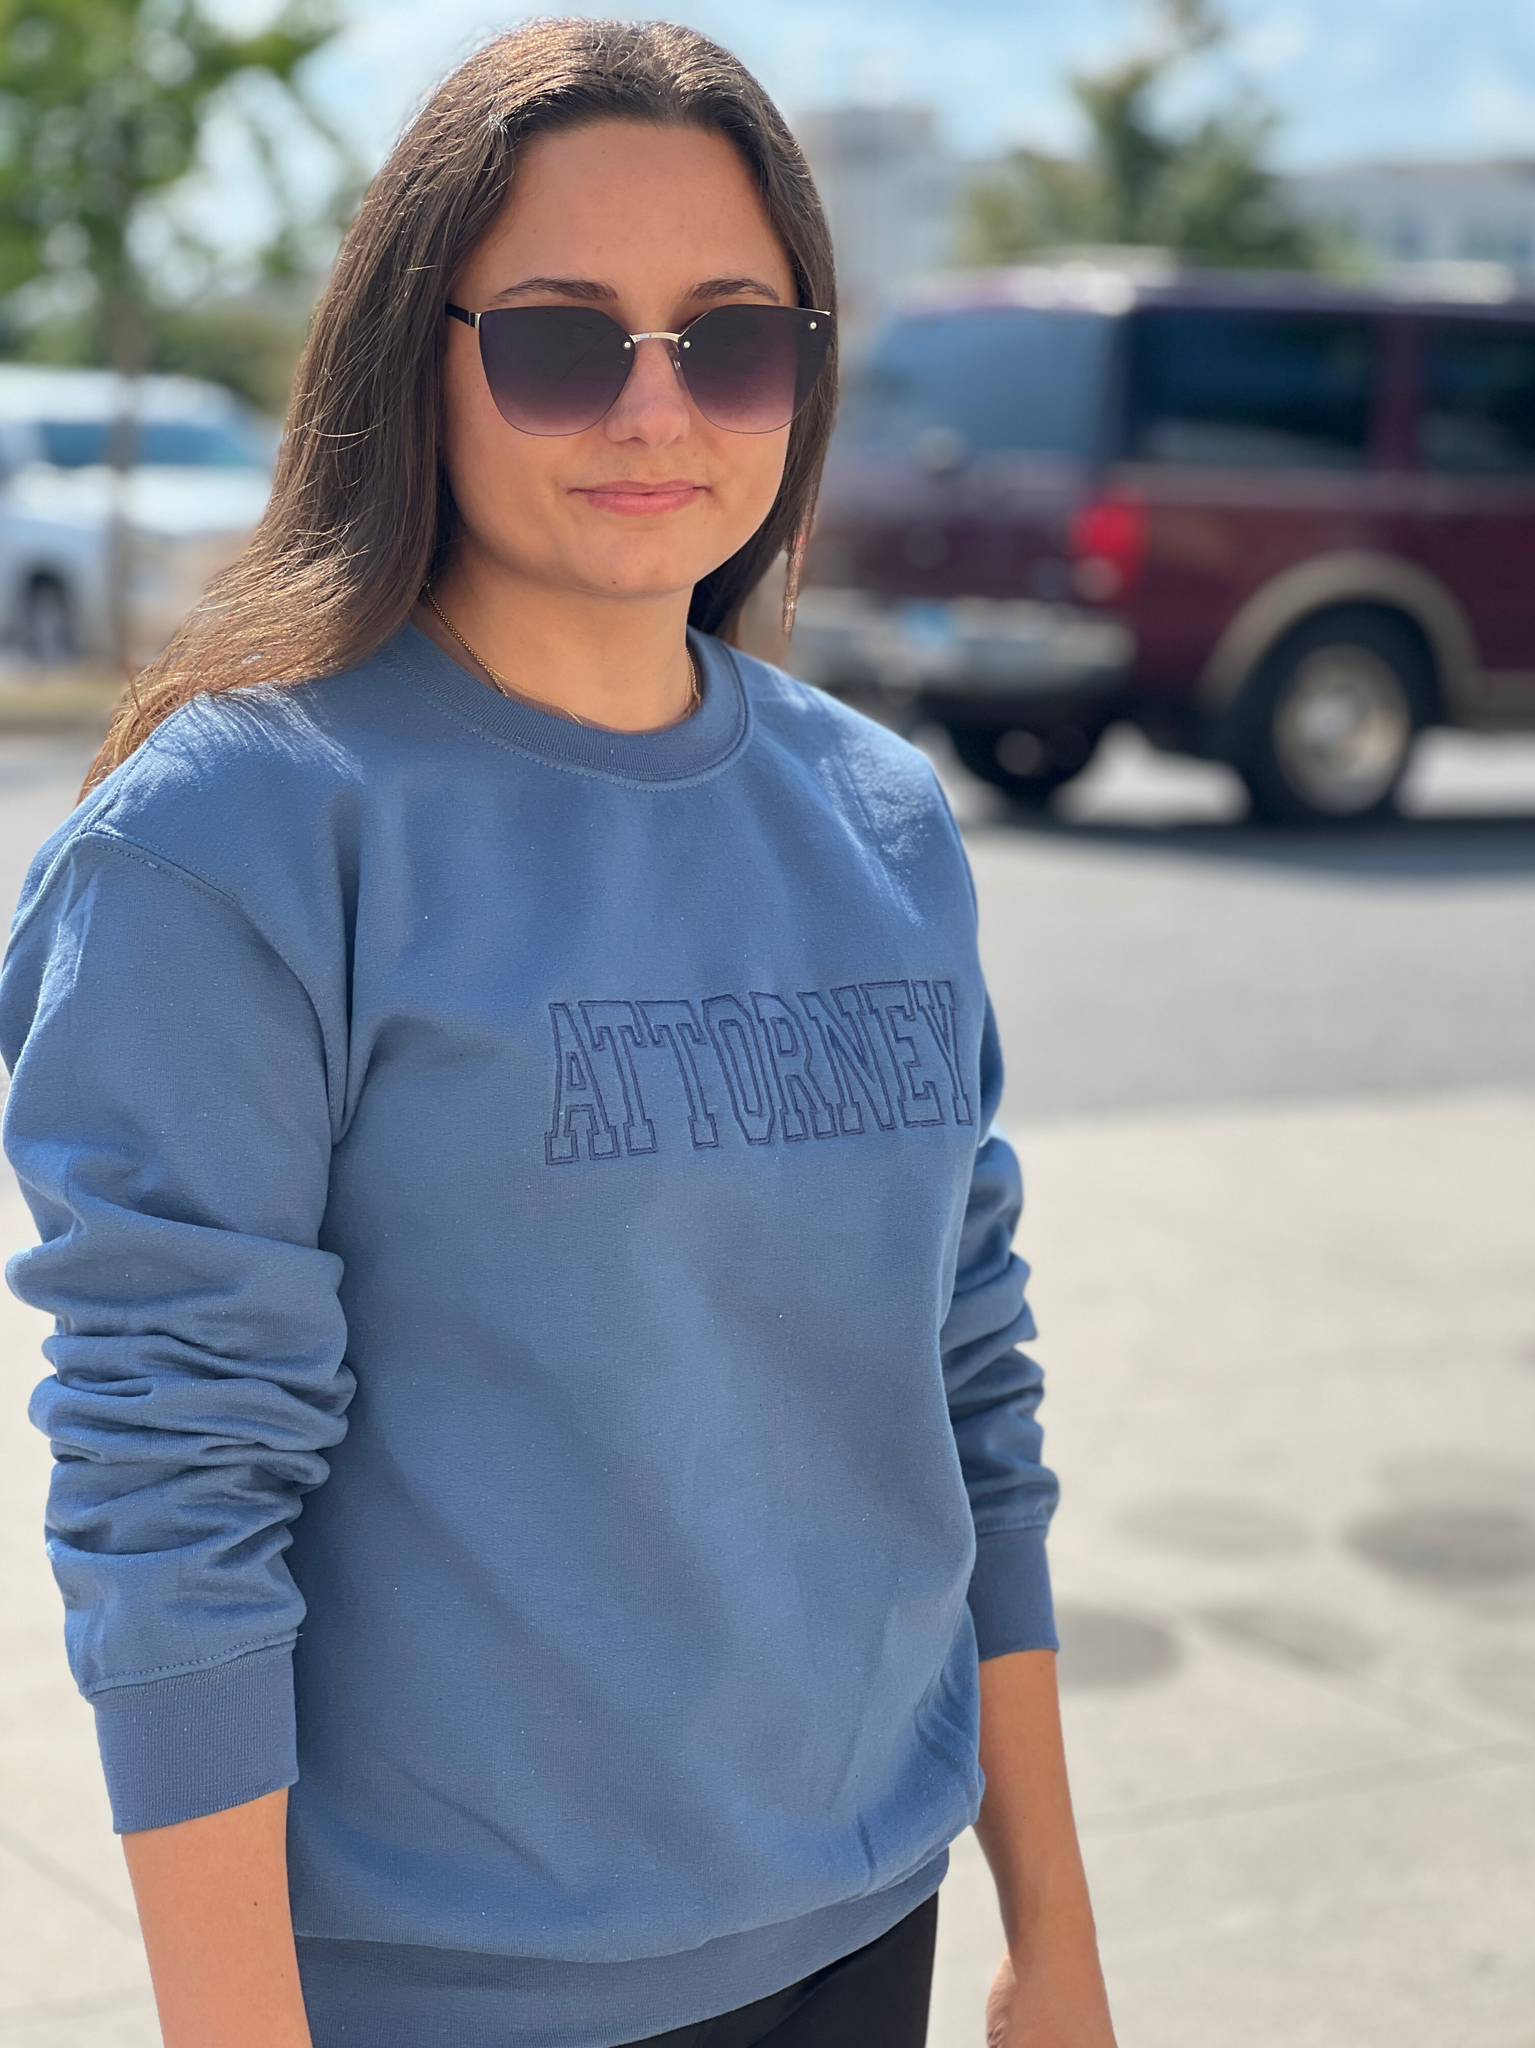 Attorney. Sweatshirt. Navy. Embroider. - touchofsouth